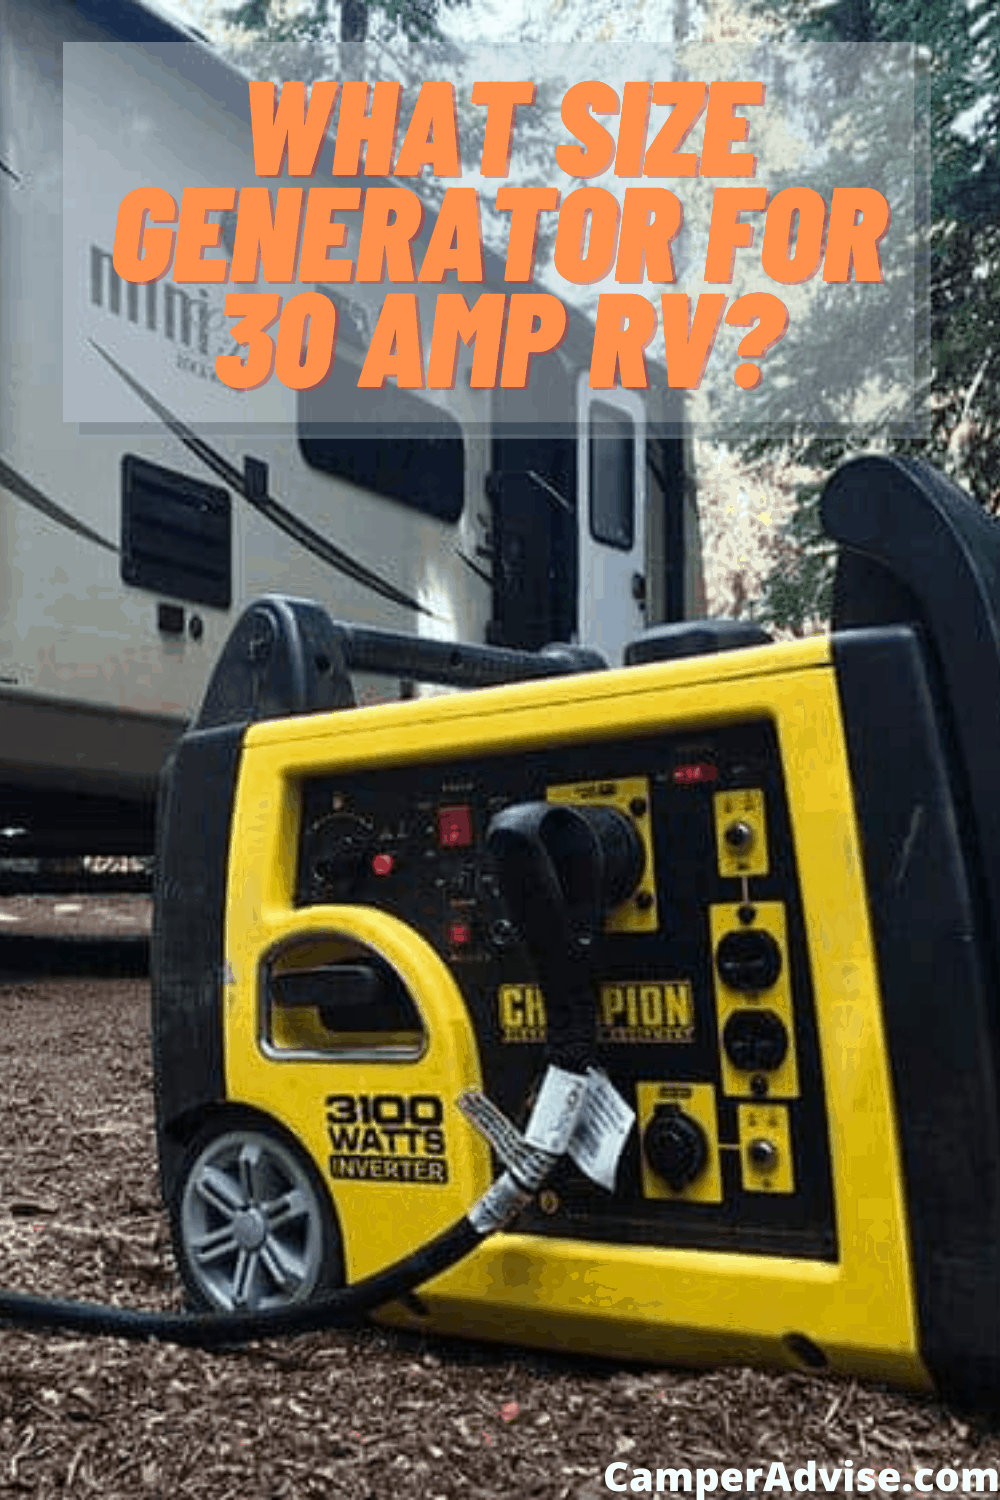 What Size Generator for 30 Amp RV Camper? (Watts?) (2021) What Size Generator To Run A Camper